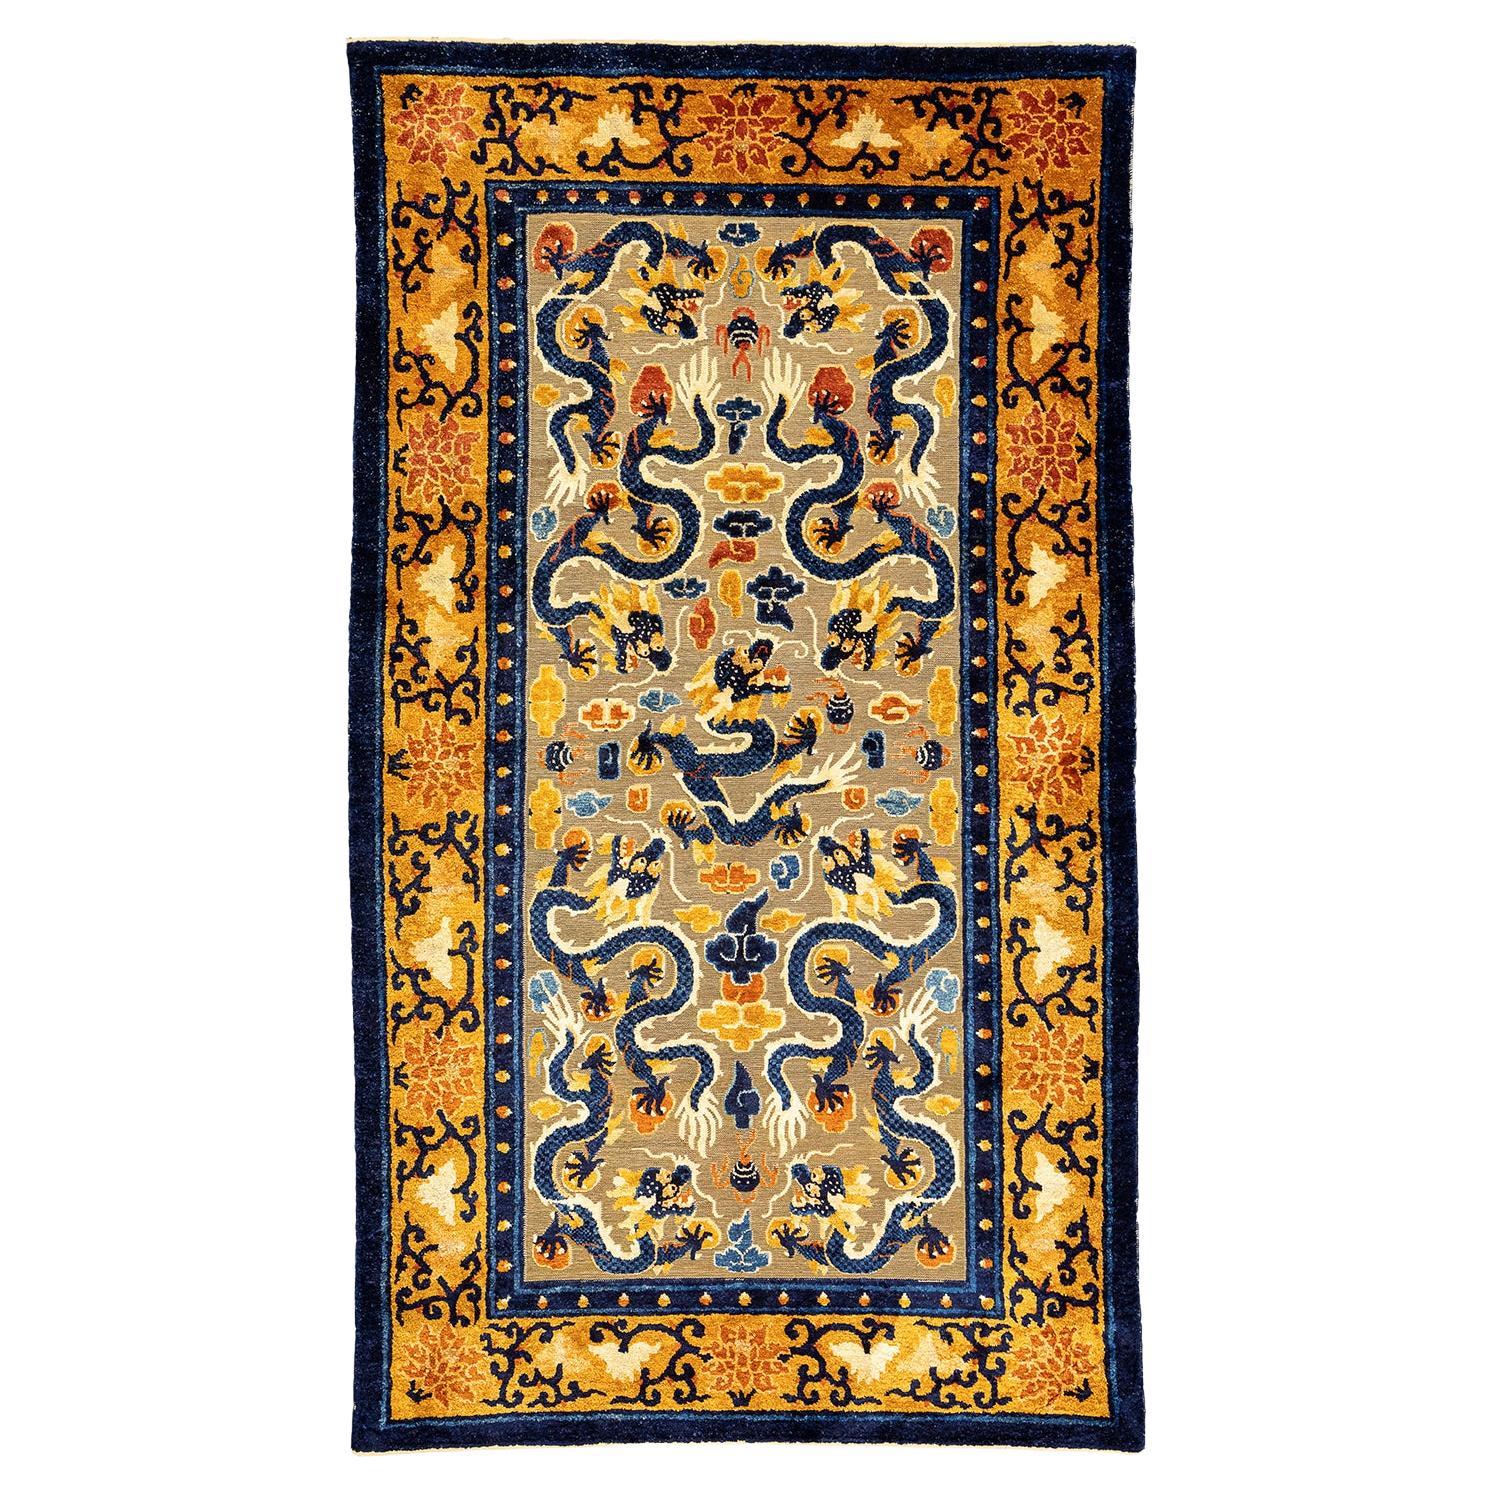 Imperial Silk&Metal Thread Chinese Rug  For Sale